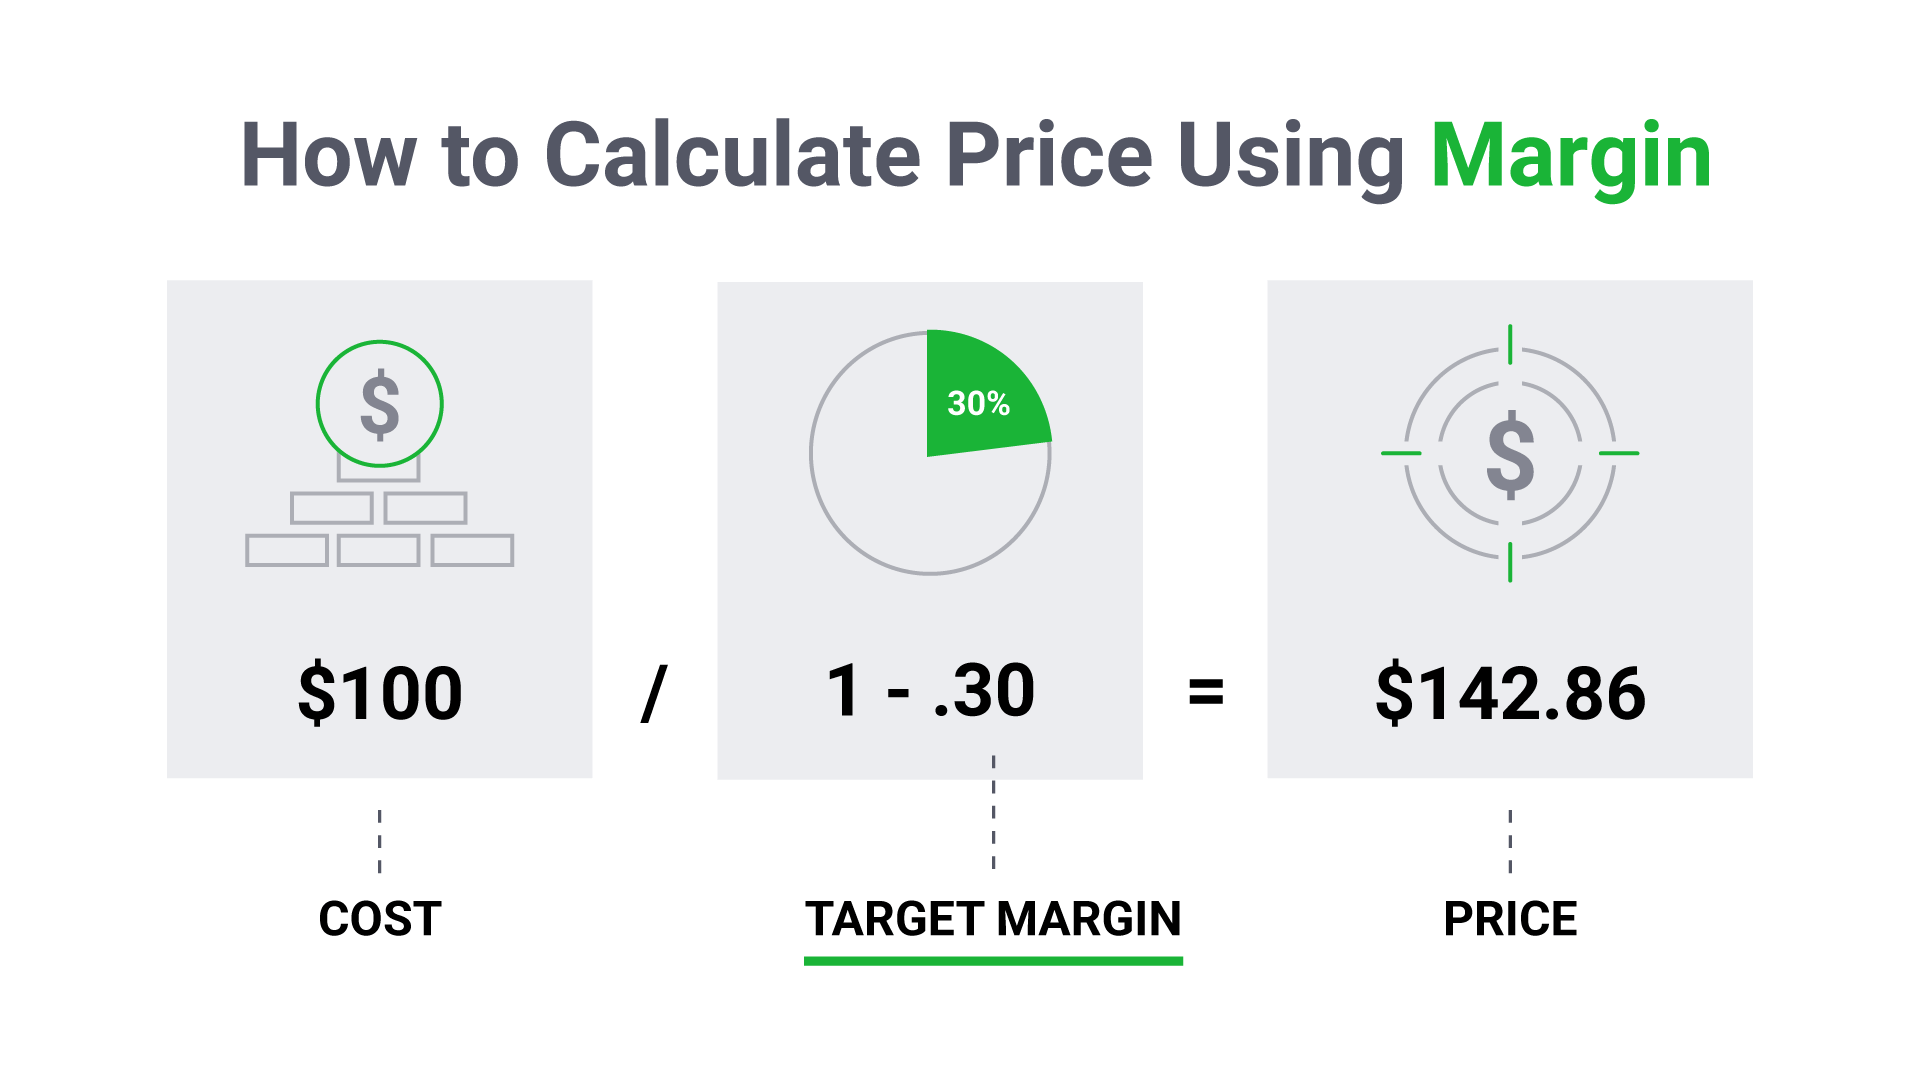 How to calculate price using margin